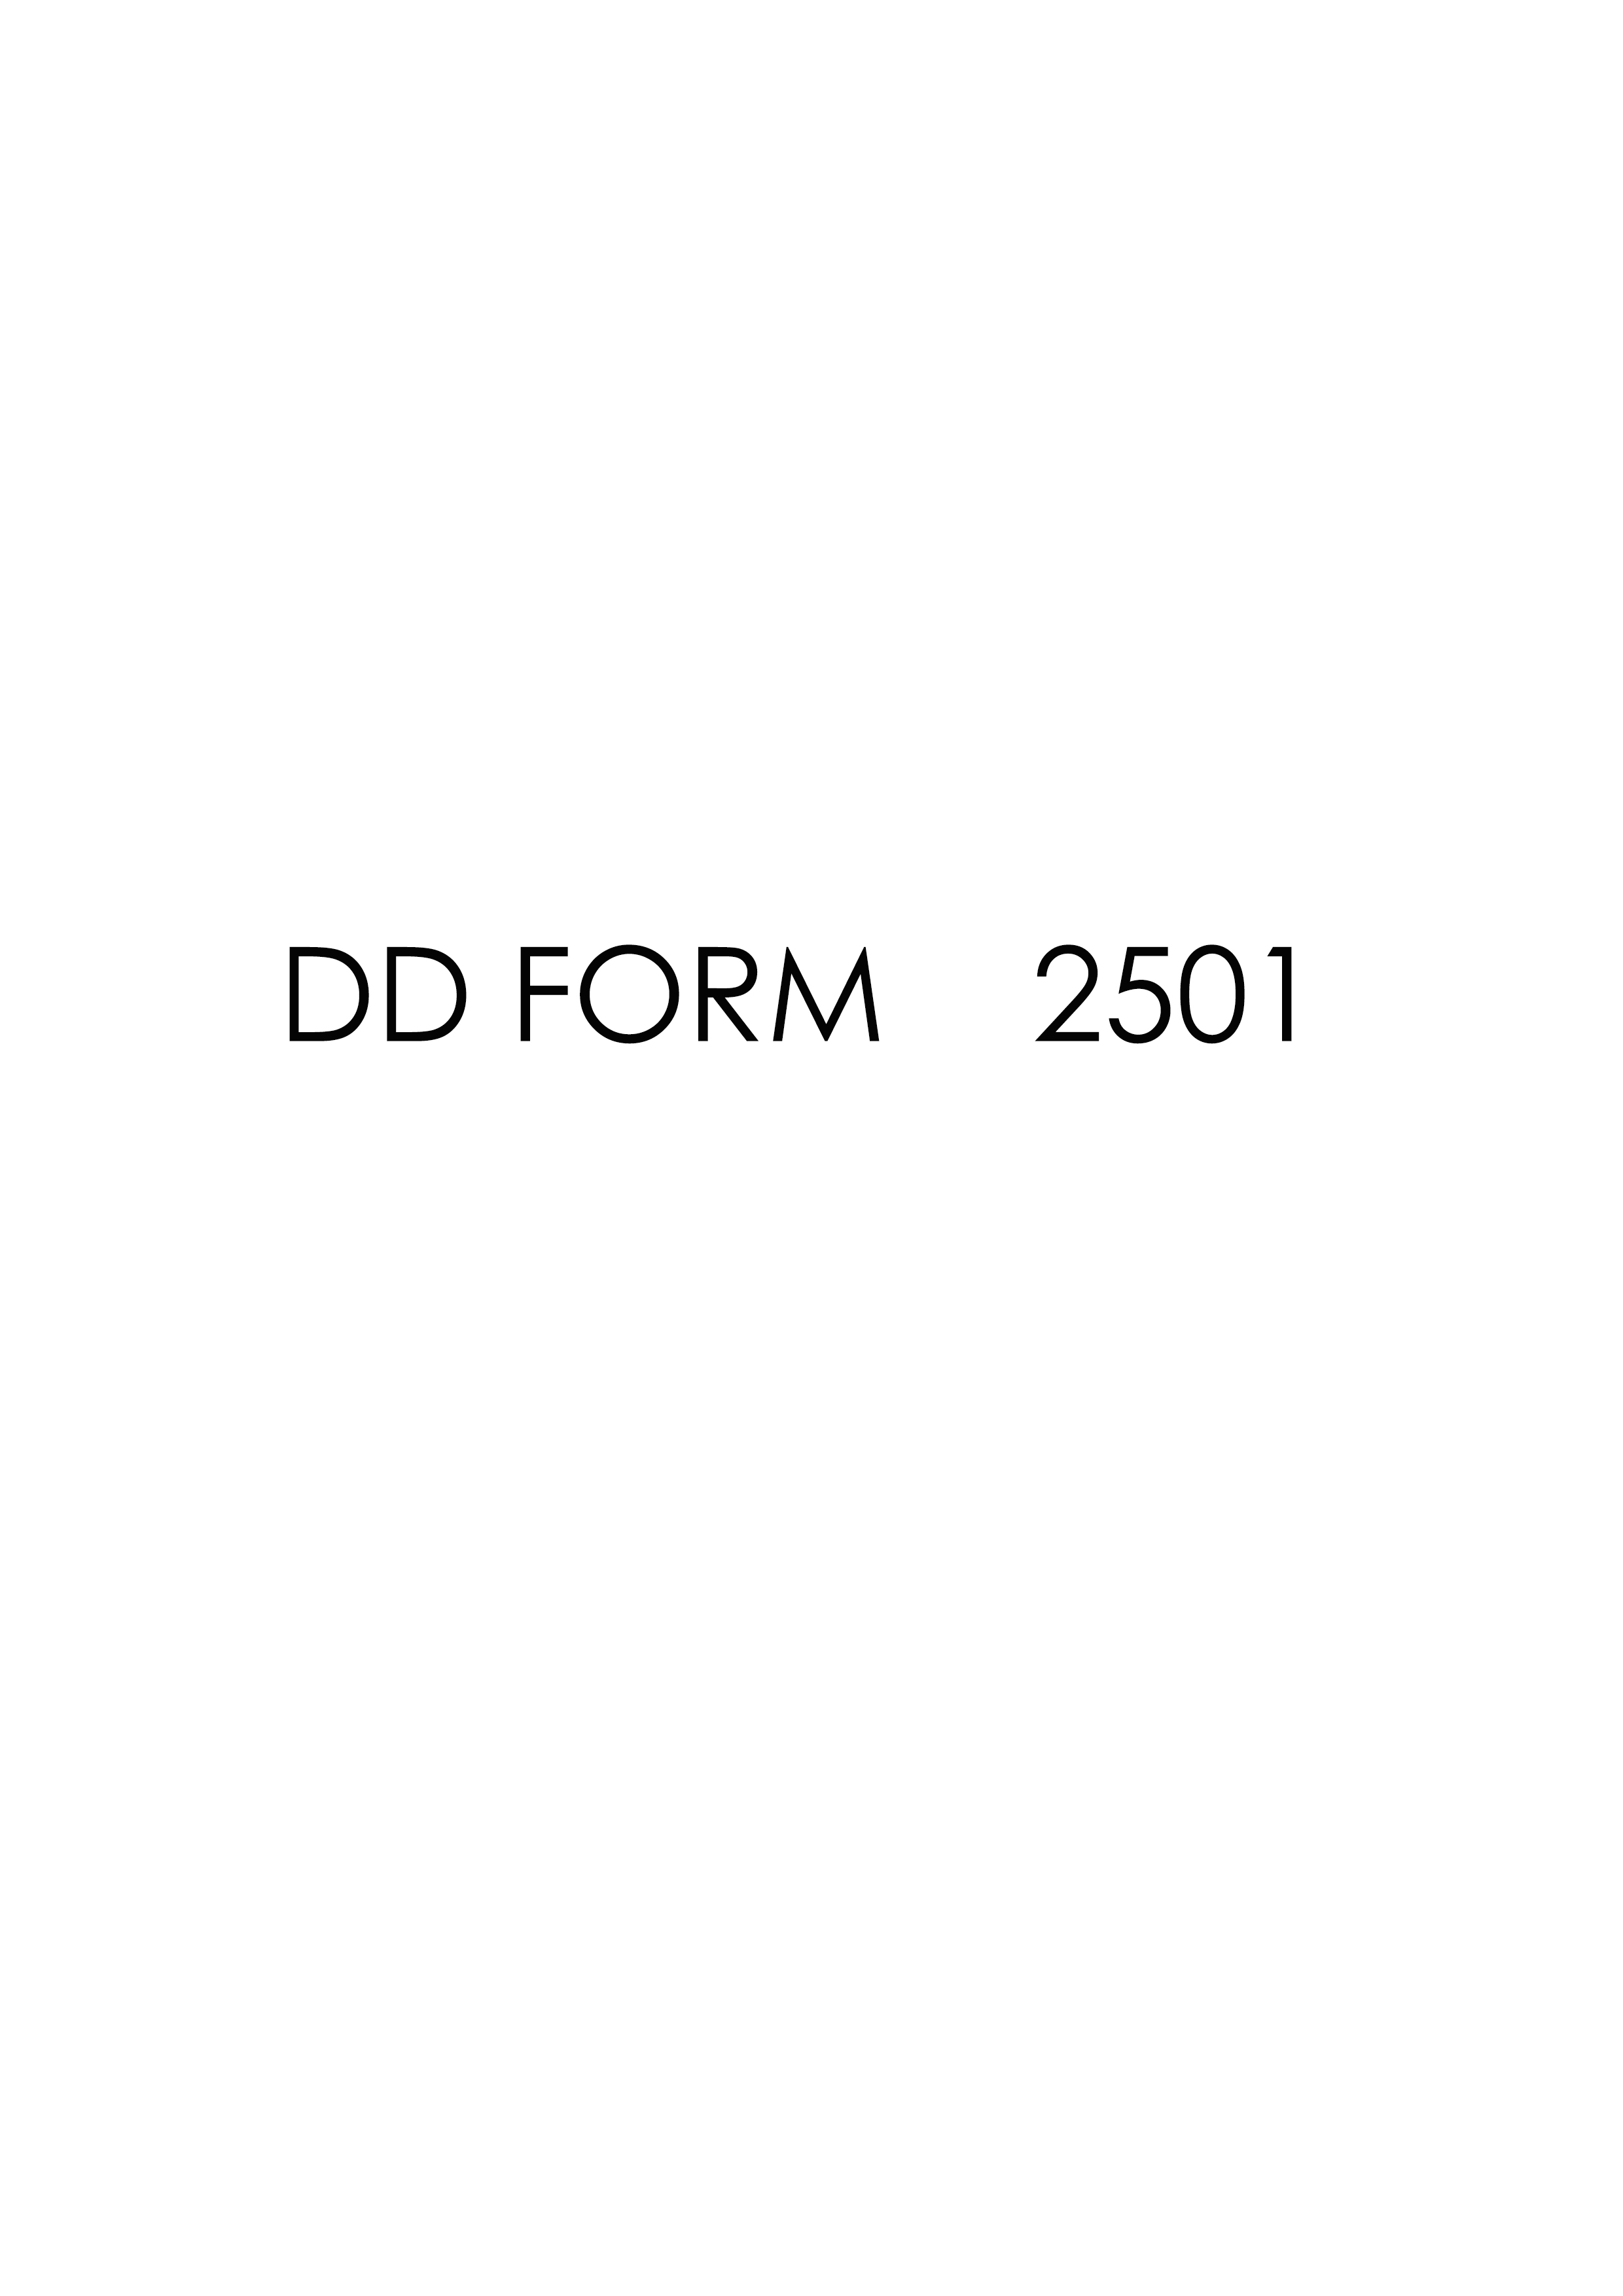 Download Fillable dd Form 2501